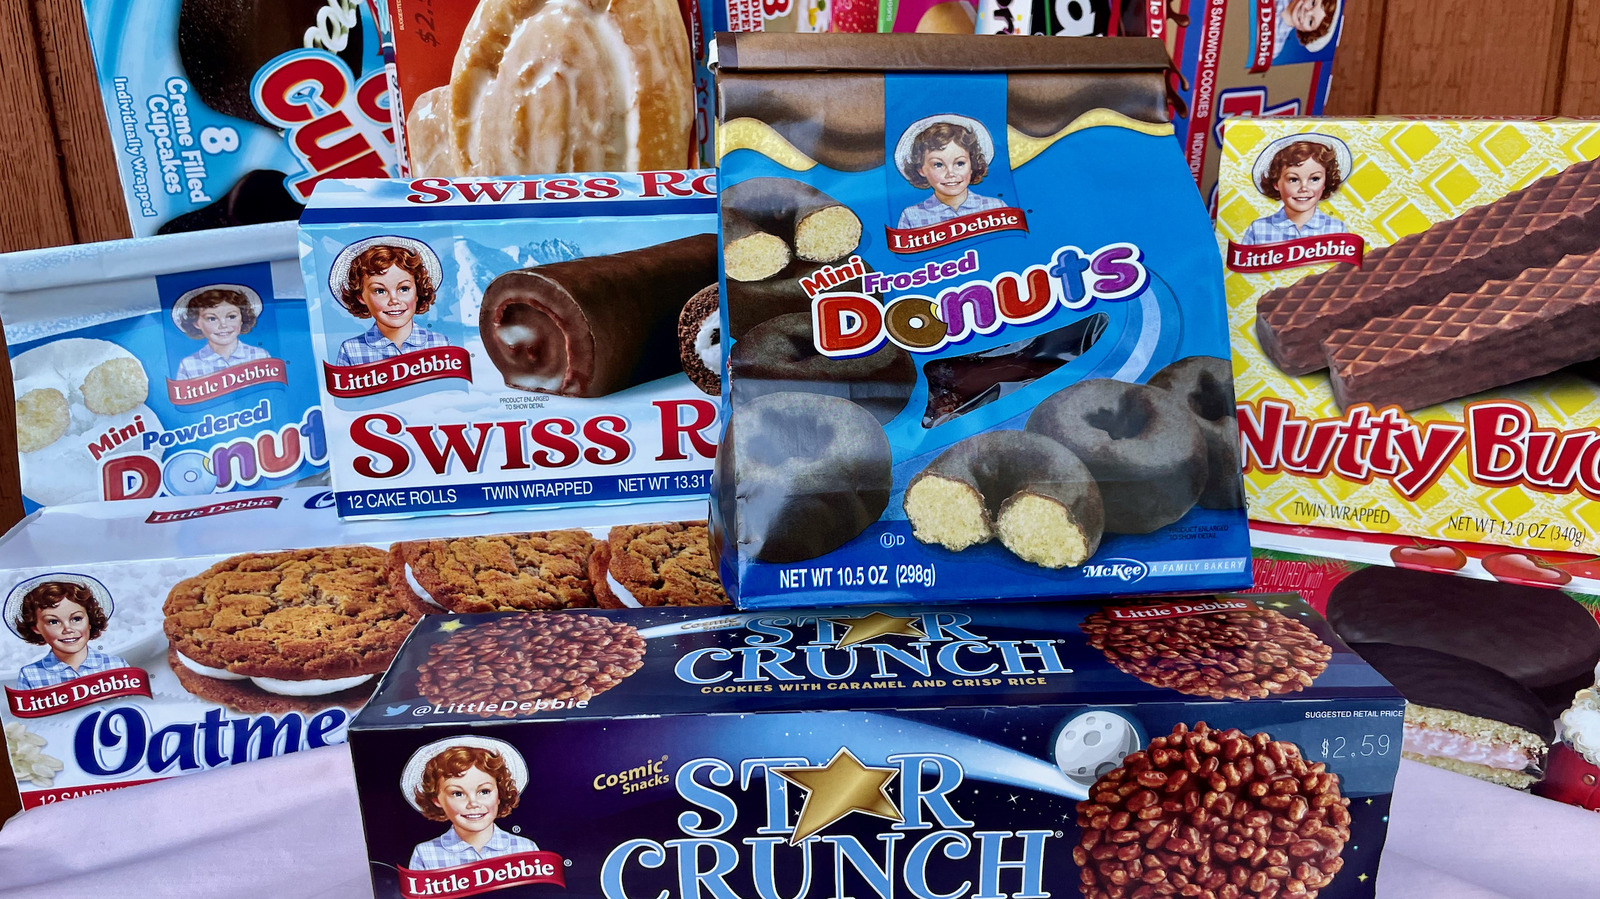 Hostess Recalls Snack Cakes for Peanut Allergens - Ding Dongs, Zingers,  Donuts Recalled